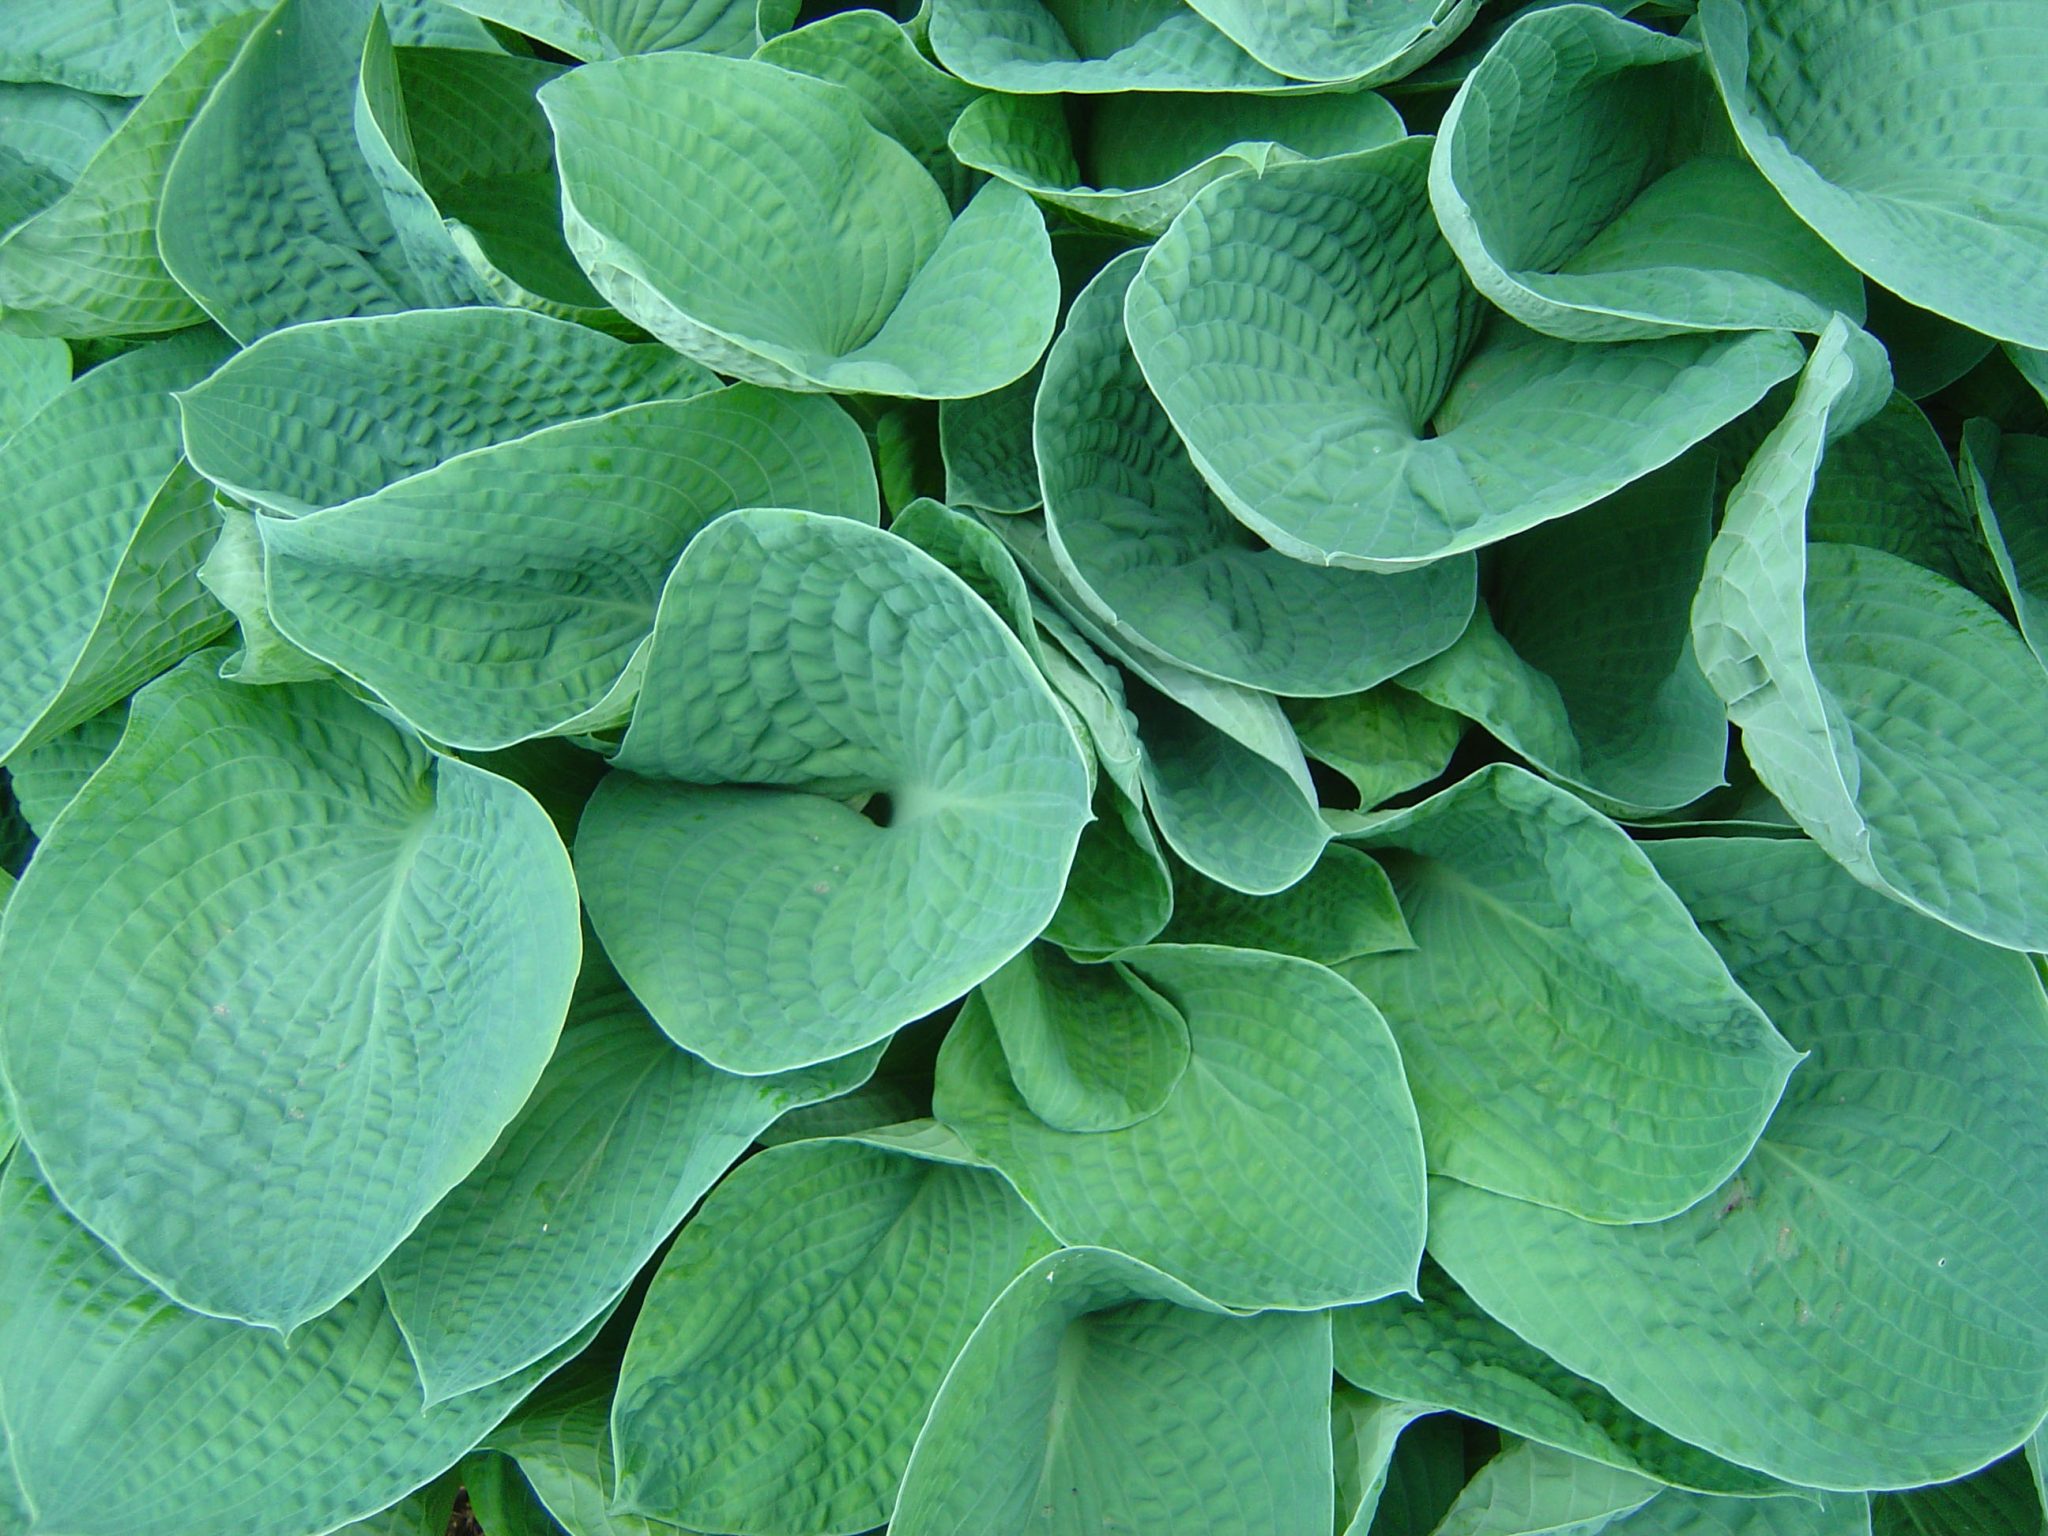 Green Hosta with Textured Leaves